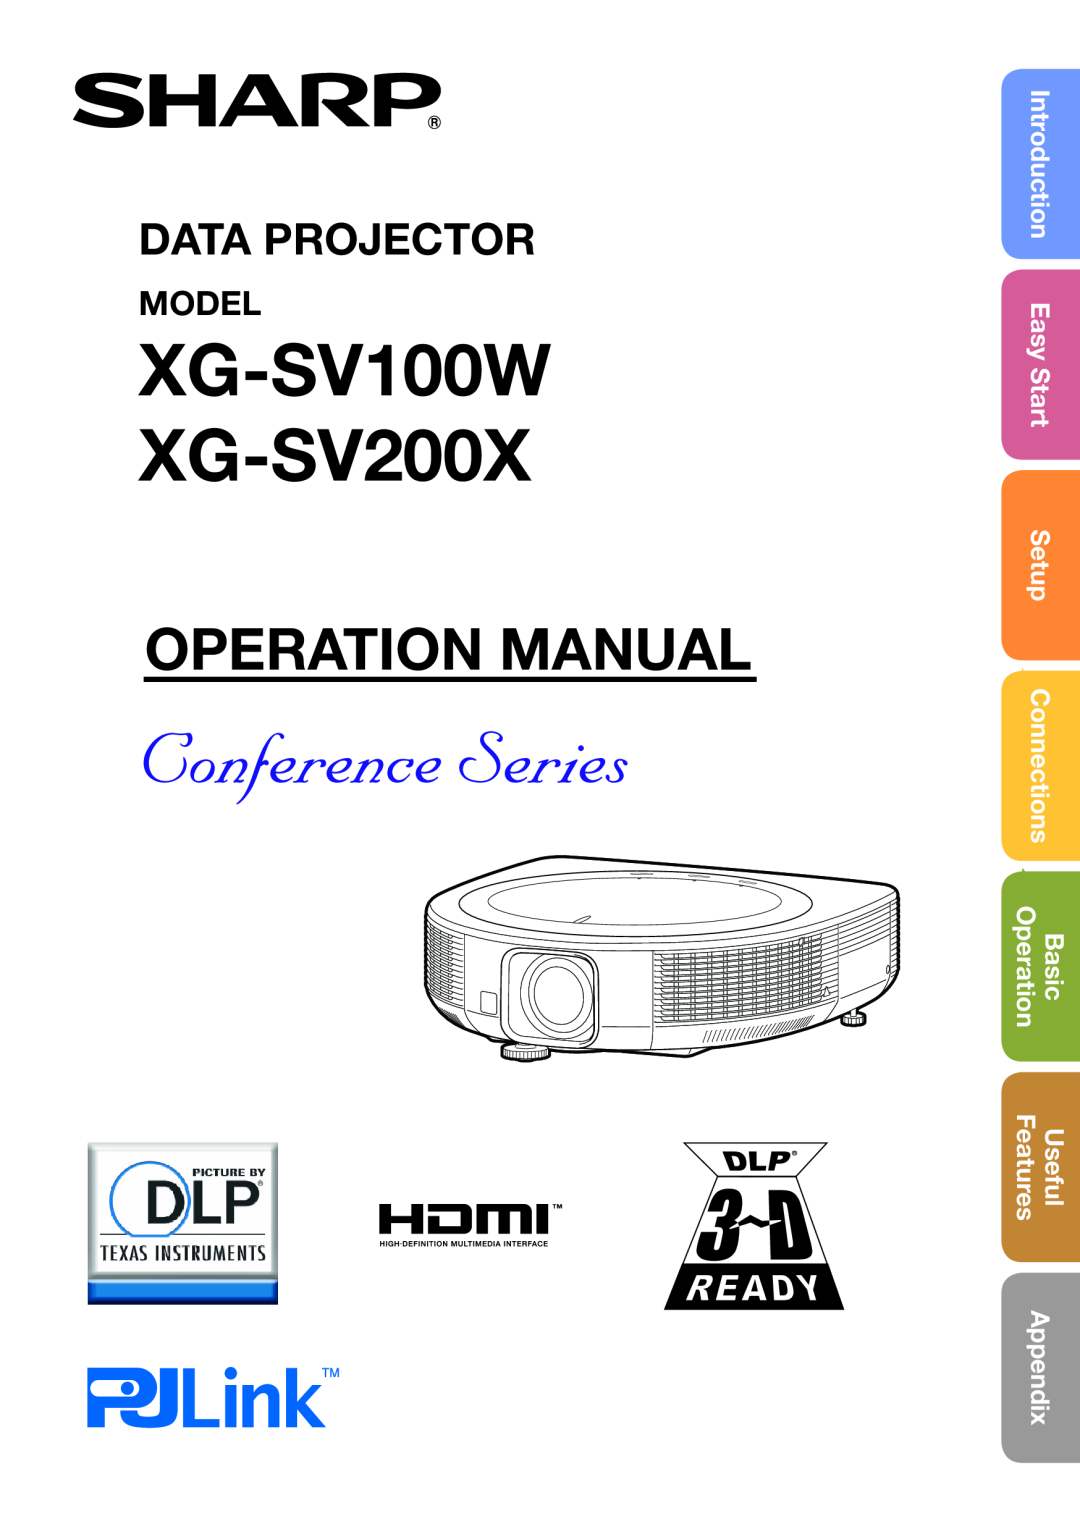 Sharp XG-SV100W appendix Model, Introduction, Easy Start, Connections, Operation, Basic, Features, Useful, Appendix, Setup 